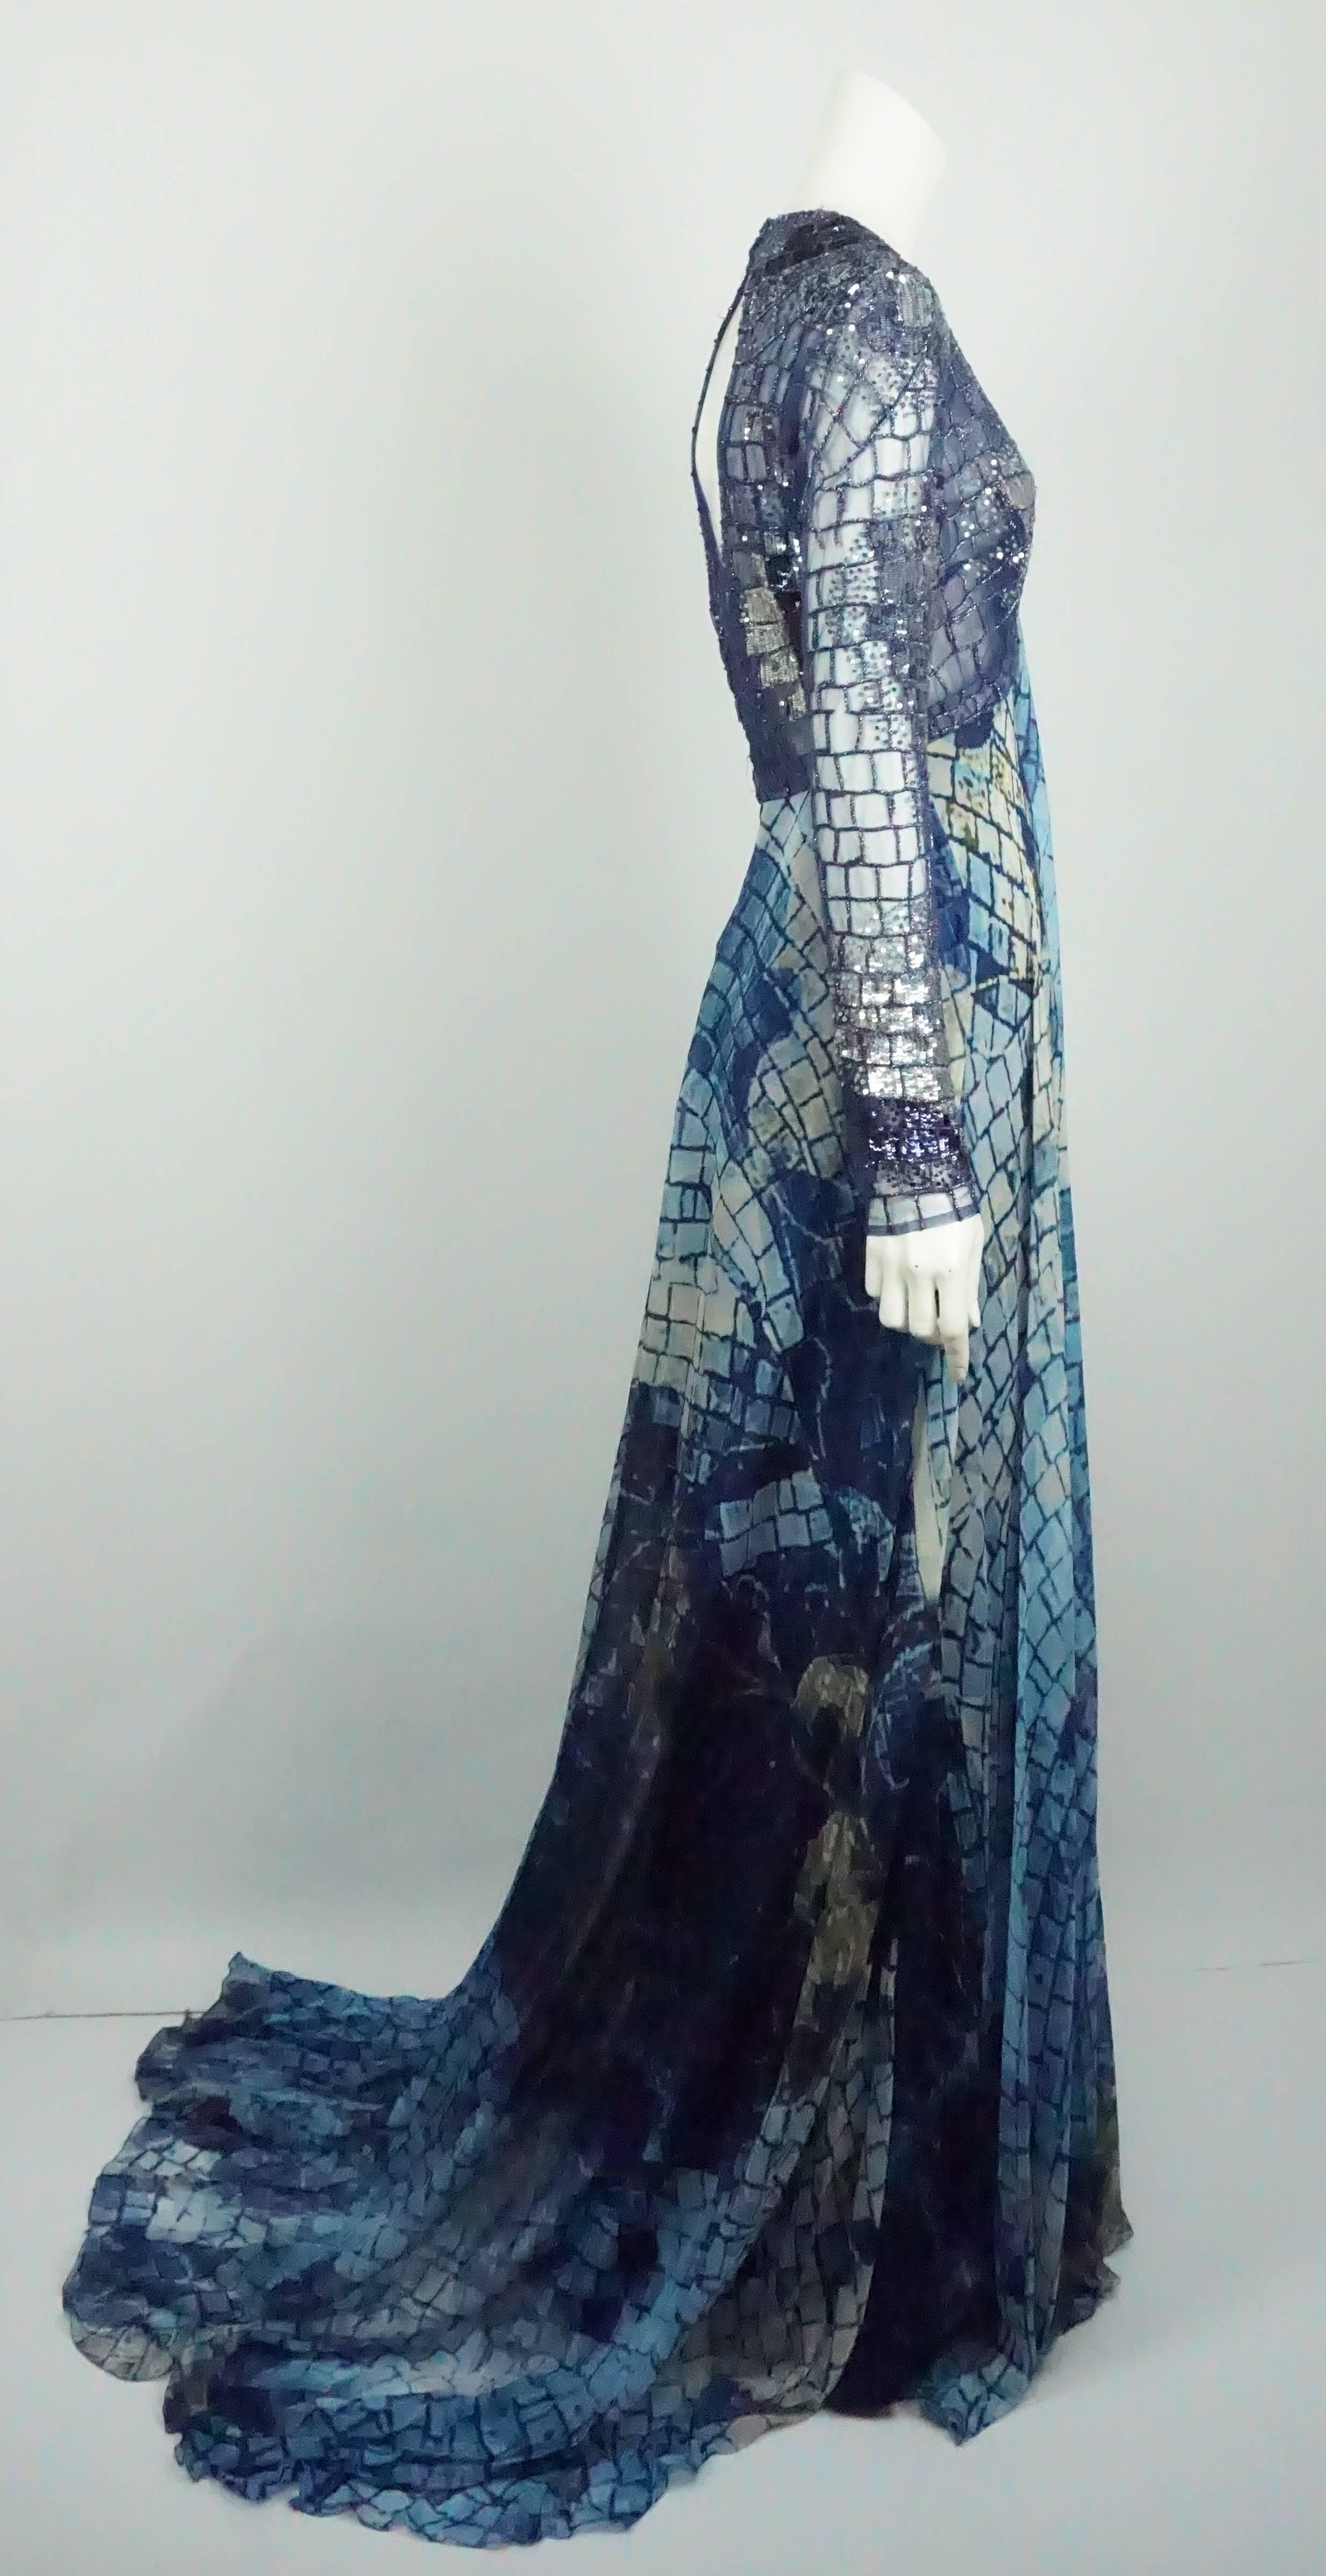 Zuhair Murad Blue Mosaic Silk Print and fully Beaded/Sequin Gown - 6 - NWT This spectacular and NEW/NEVER WORN Blue Mosaic Silk Print Gown has a fully sequin/beaded mesh bodice and long sleeve with an oval opening in the back and a V looking